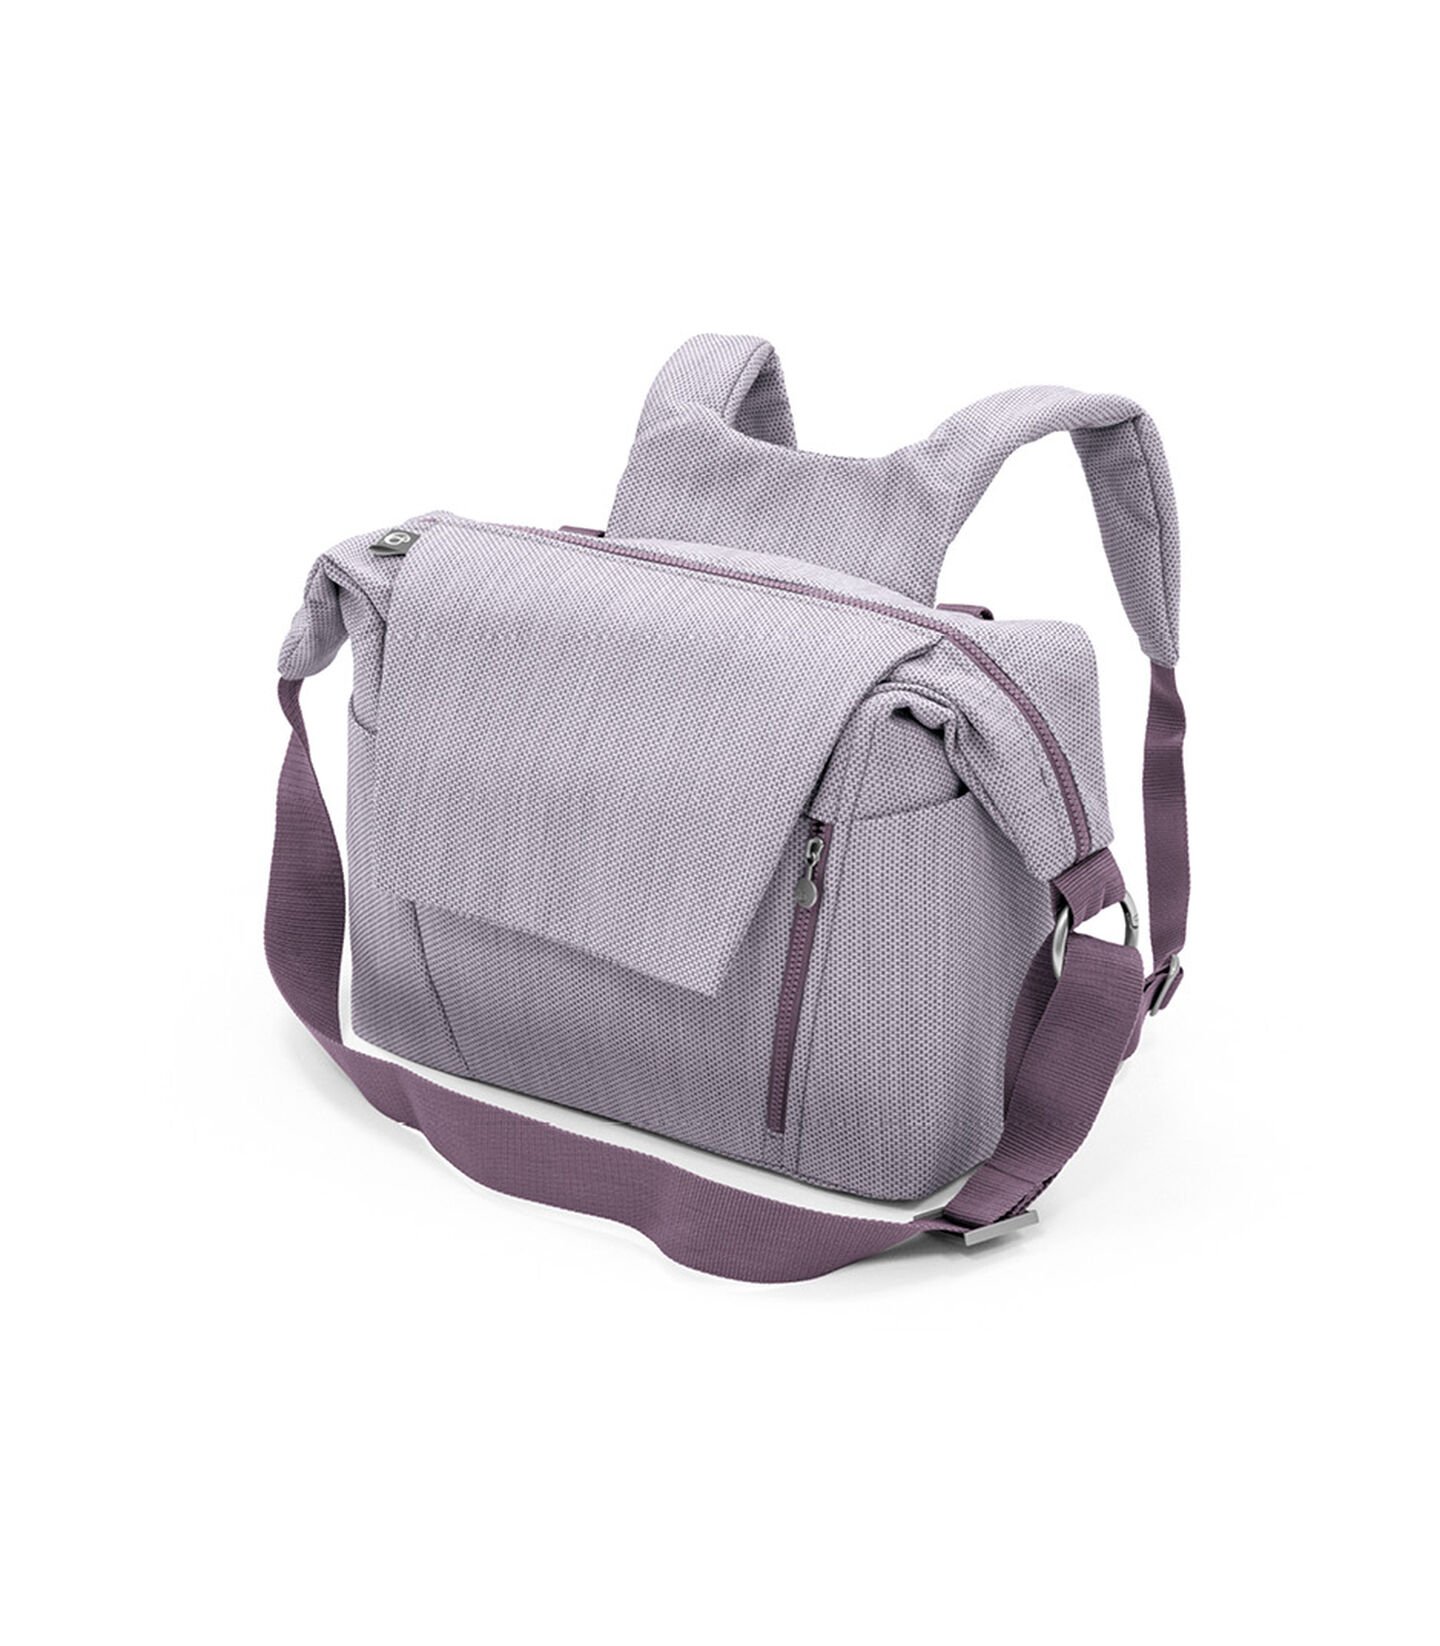 Stokke® Changing bag Brushed Lilac, Lila brossé, mainview view 1